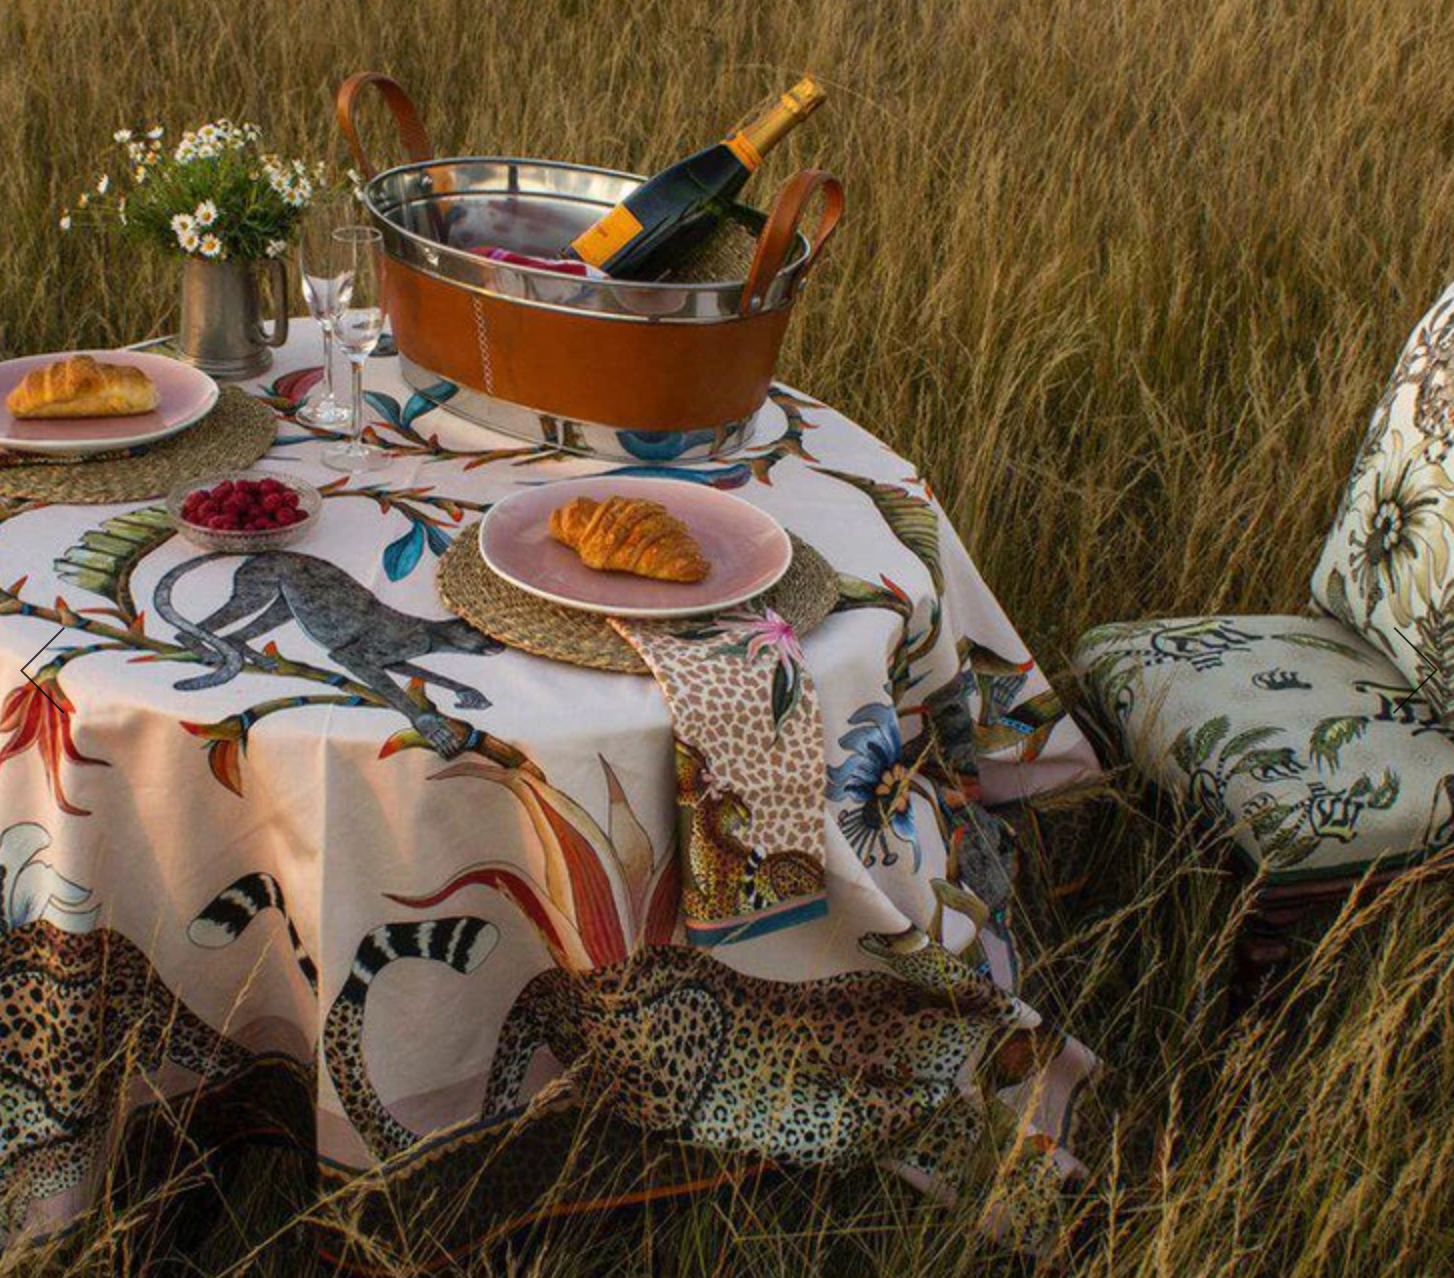 Ardmore "Leopard Lily Stone" napkin sets from South Africa